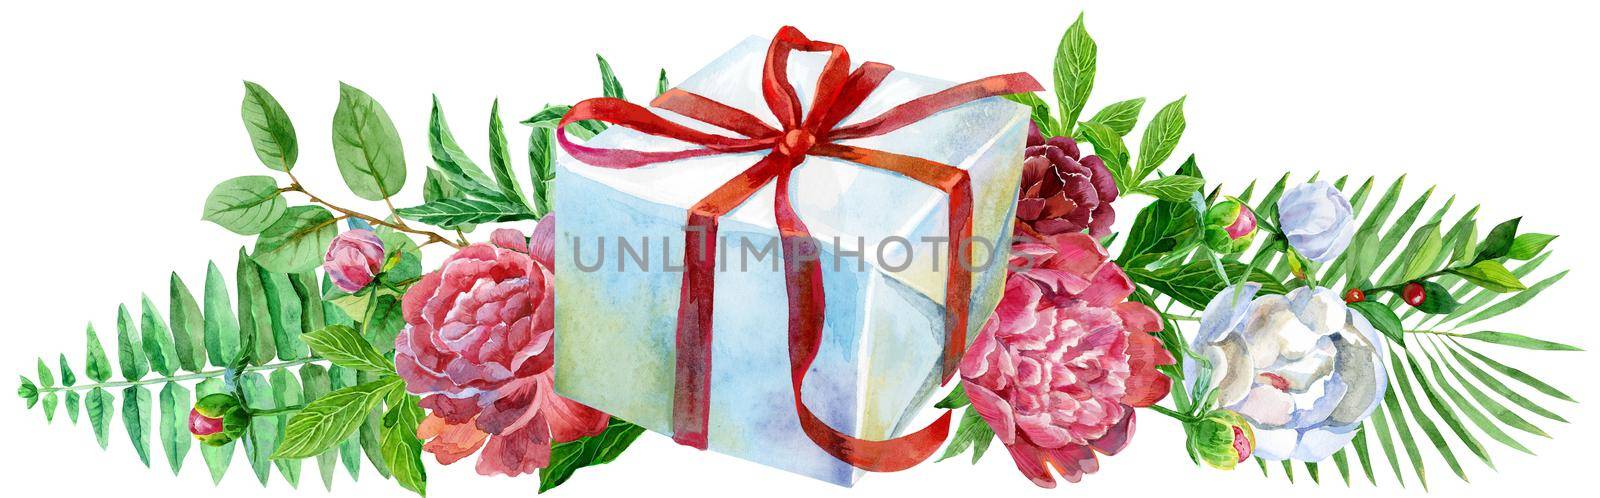 Watercolor llustration with gift box and peonies. For design, print or background by NataOmsk